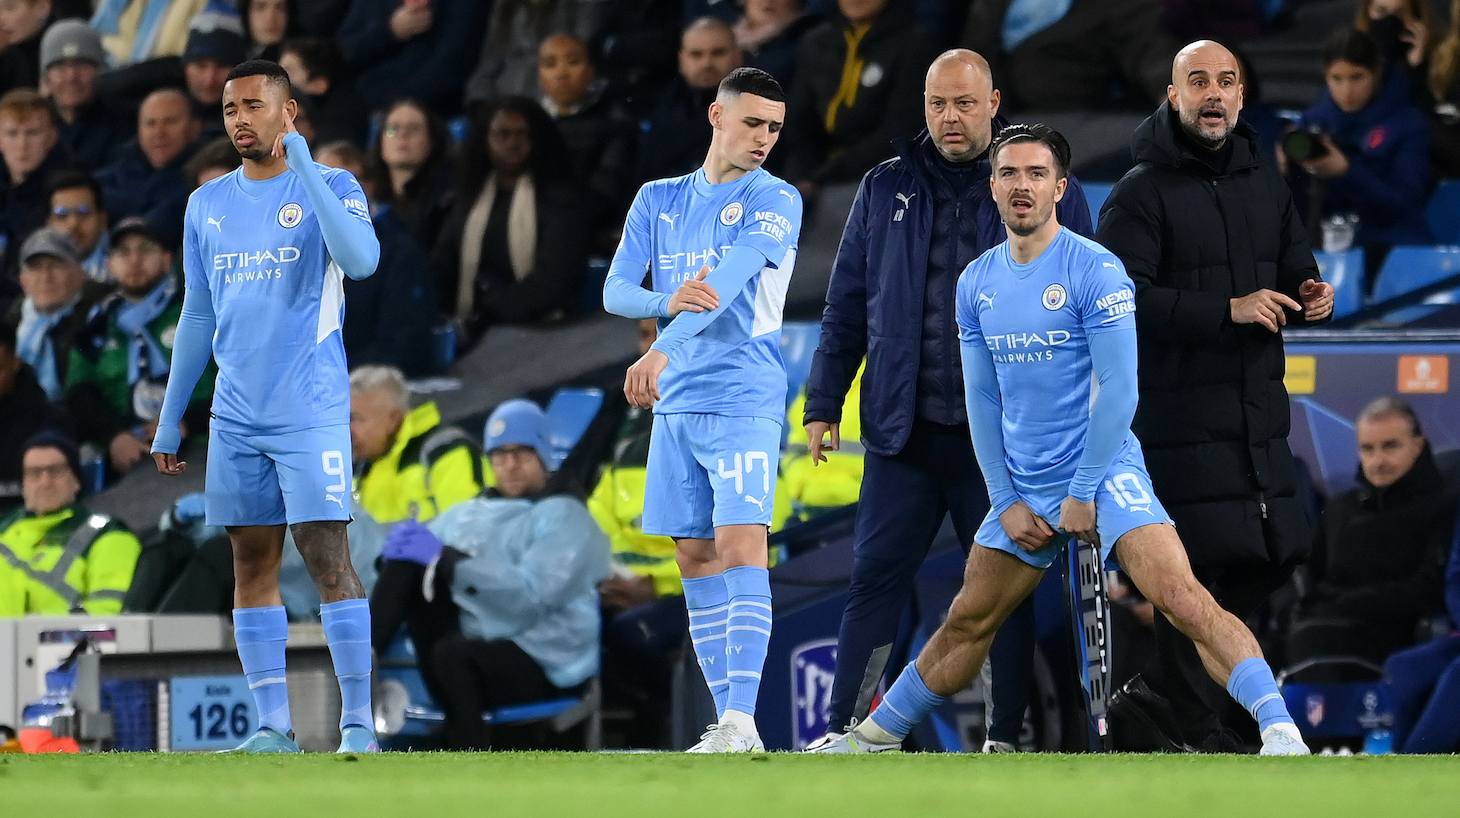 Gabriel Jesus, Phil Foden and Jack Grealish of Manchester City prepare to come on during the UEFA Champions League Quarter Final Leg One match between Manchester City and Atletico Madrid at City of Manchester Stadium on April 05, 2022 in Manchester, England.